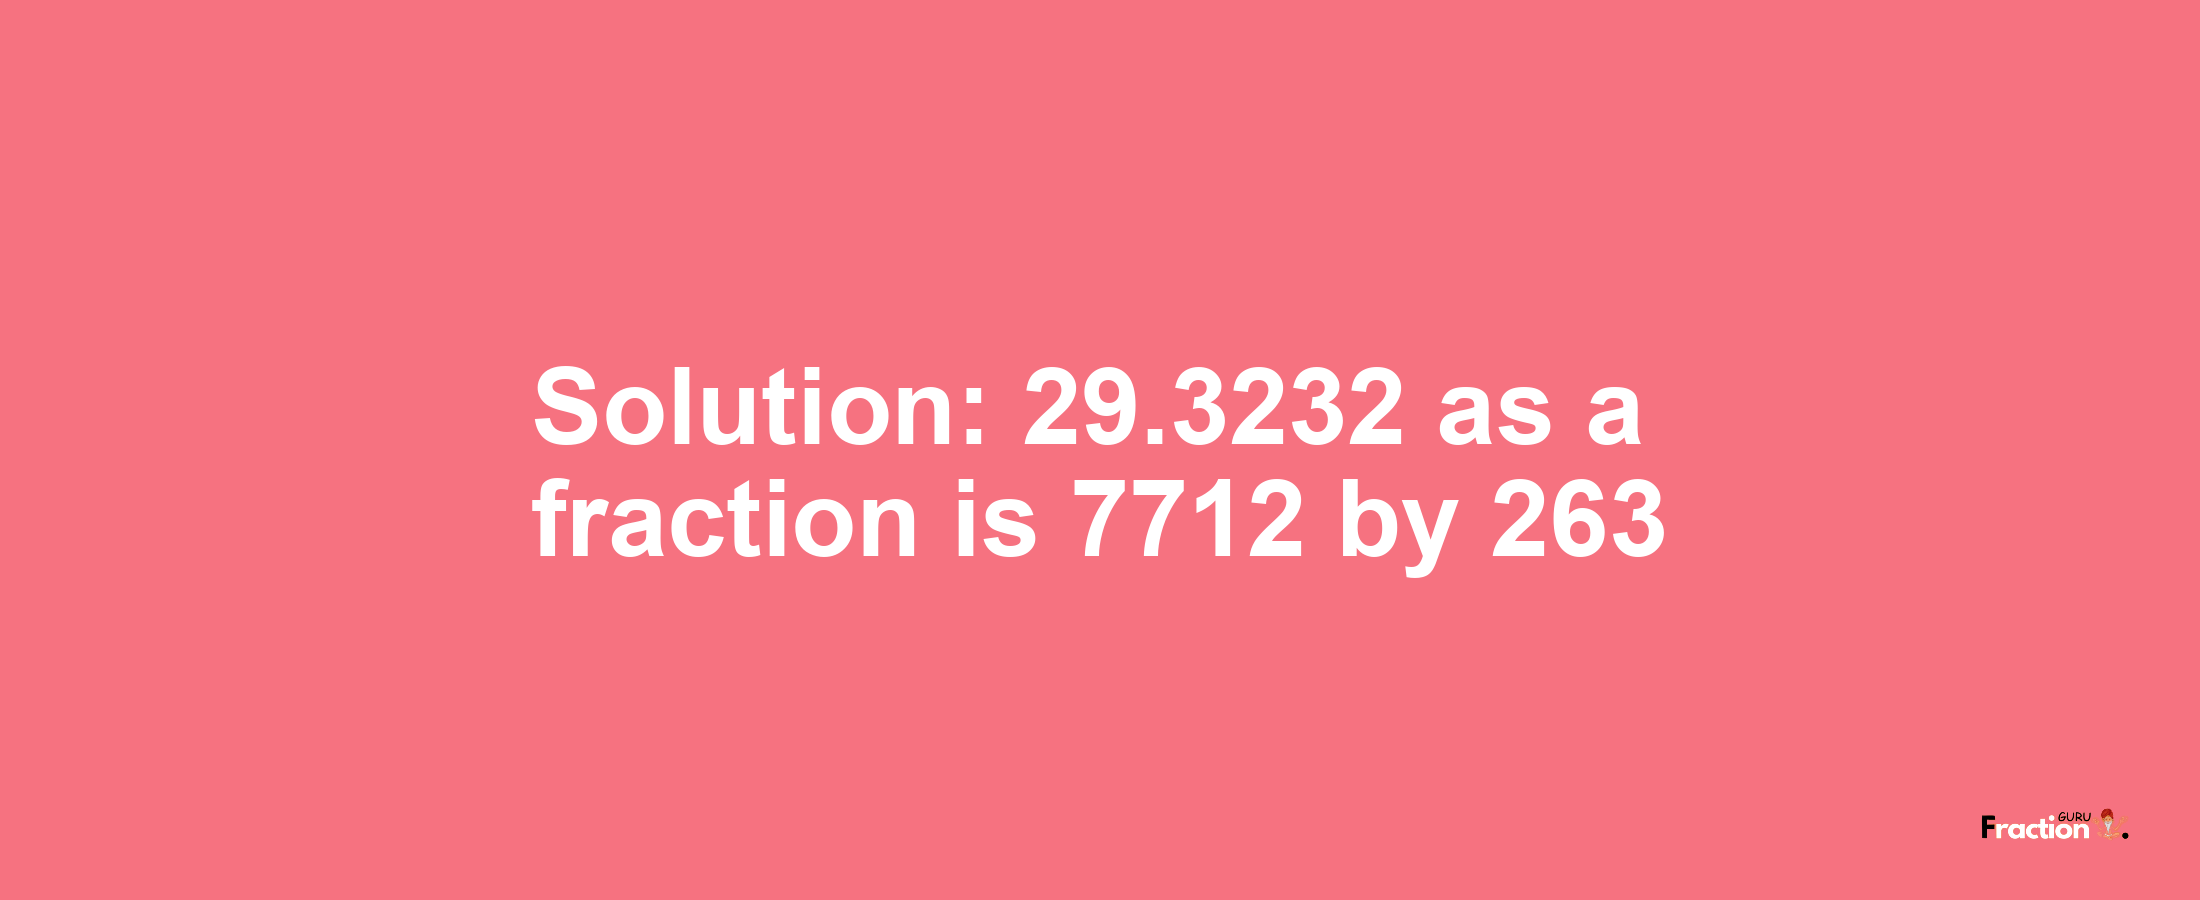 Solution:29.3232 as a fraction is 7712/263